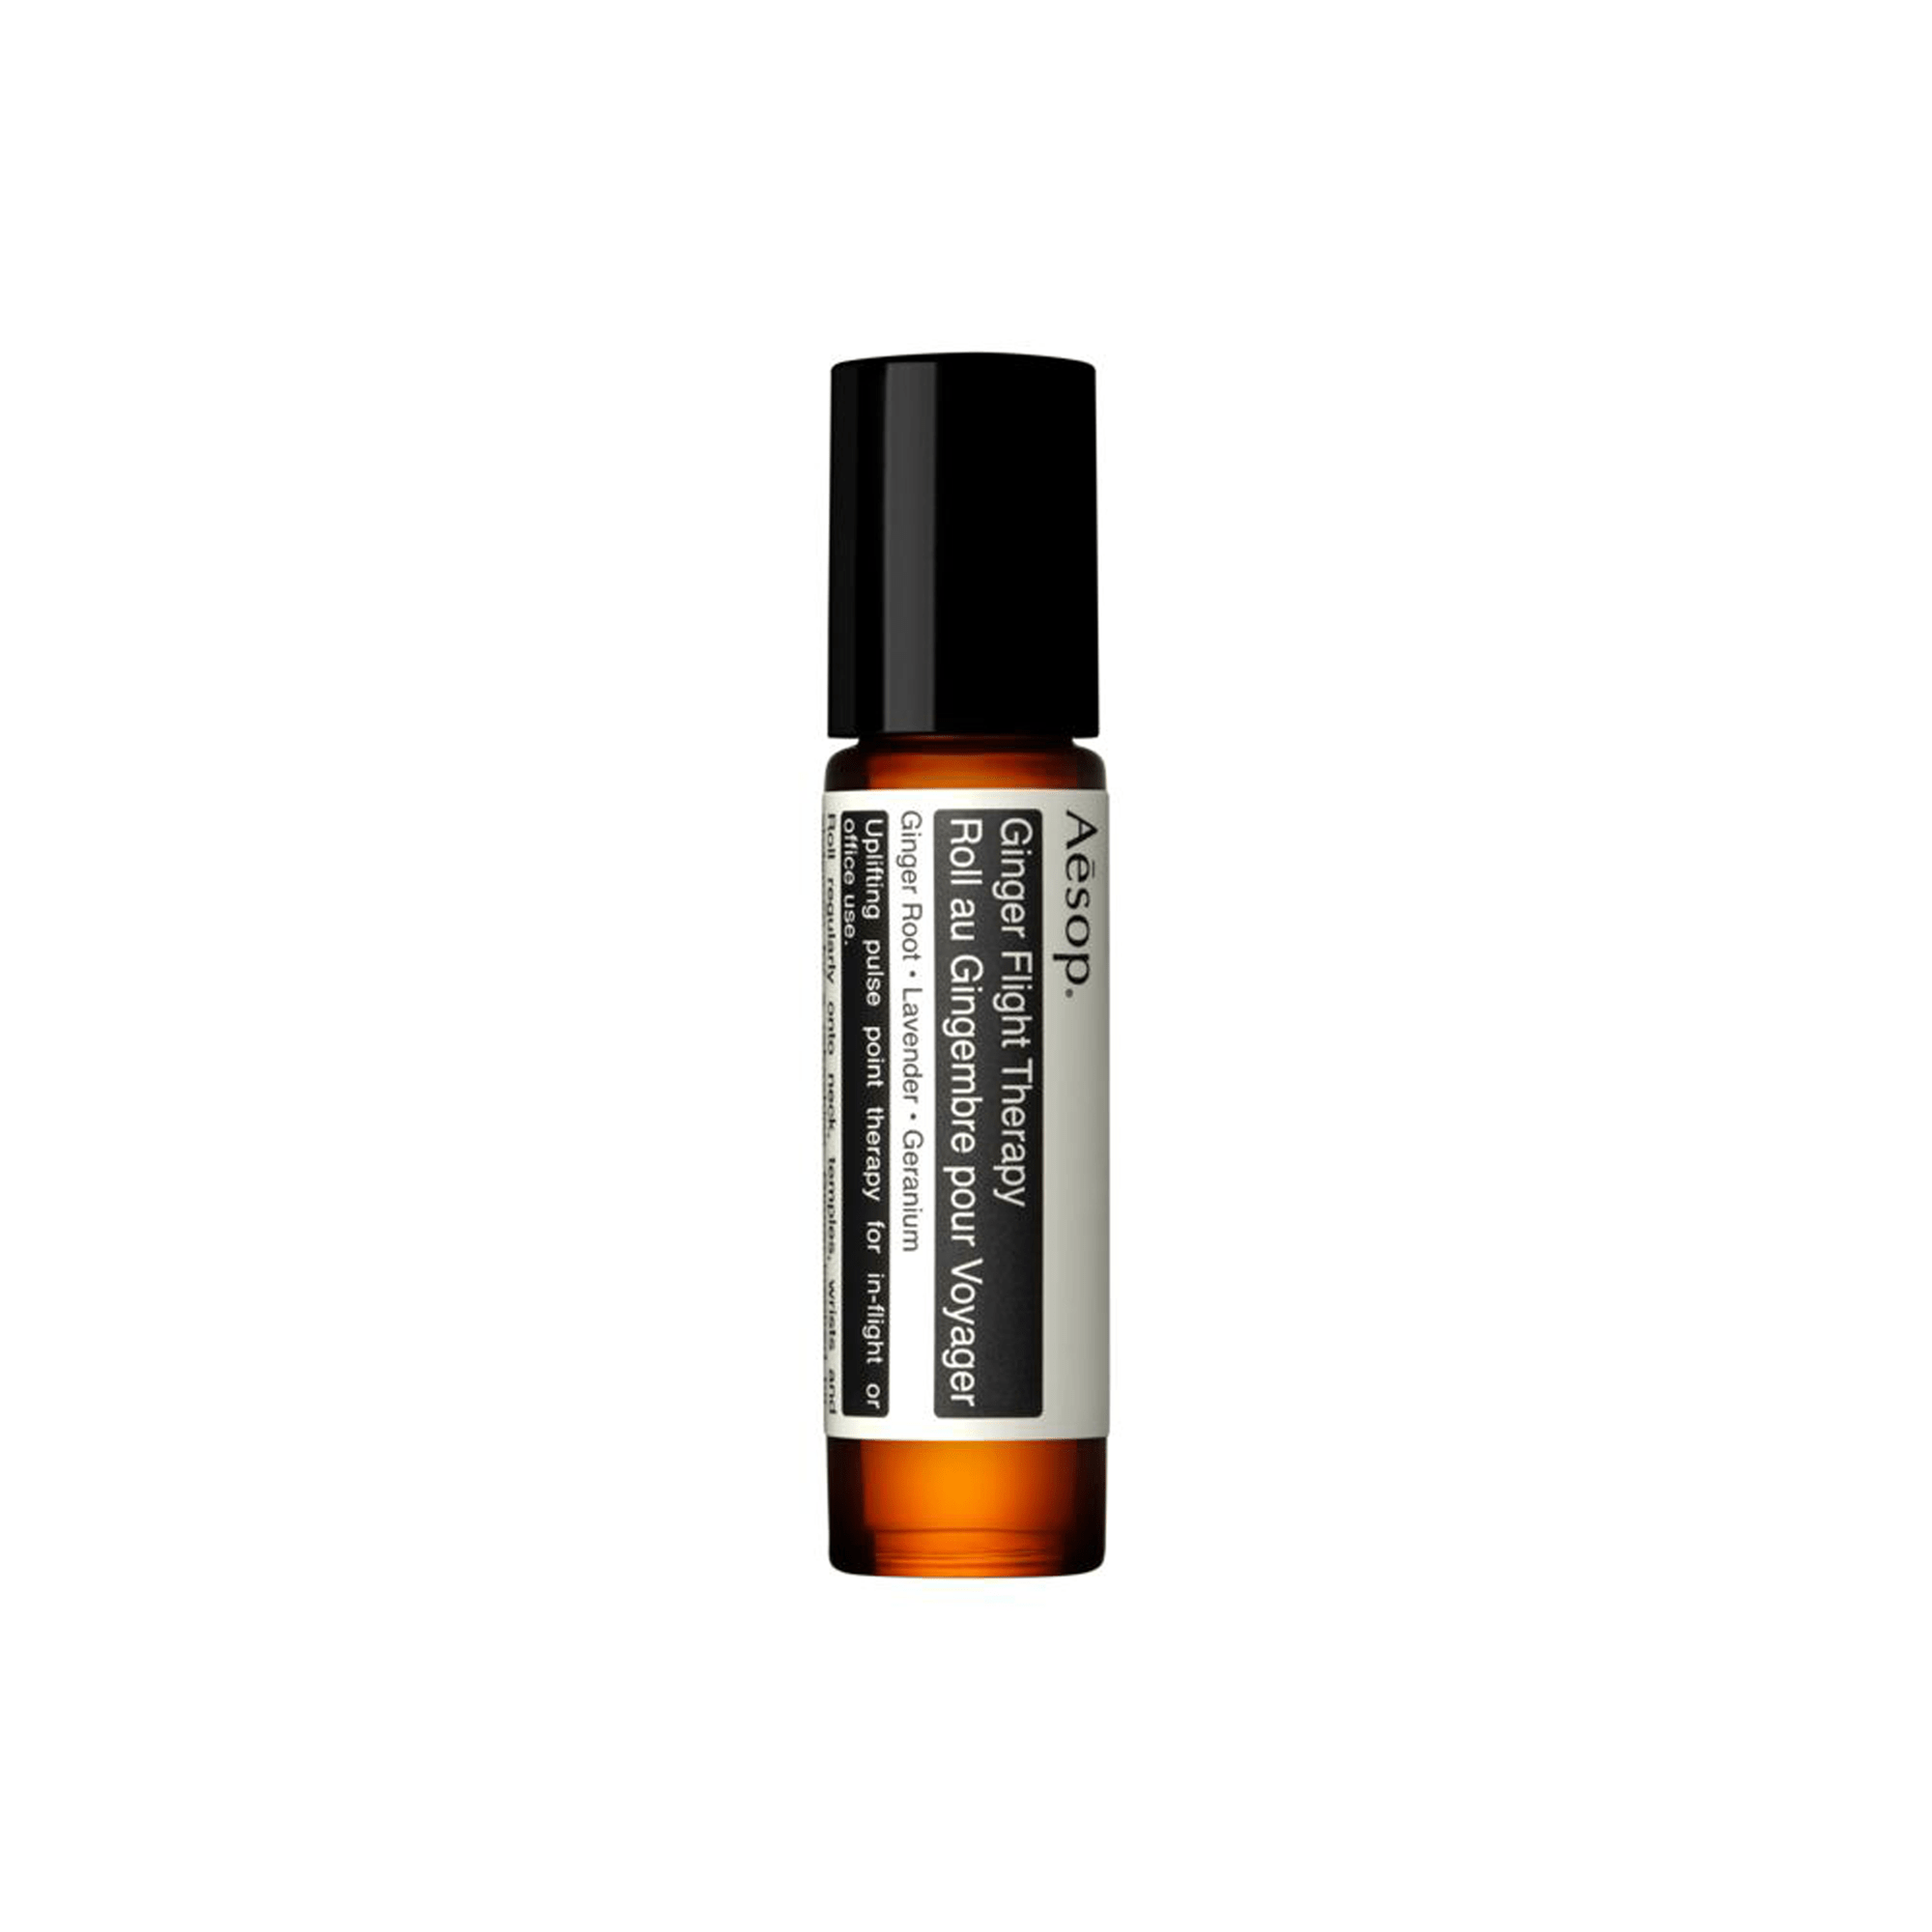 Ginger Flight Therapy Aesop Therapy roll-on